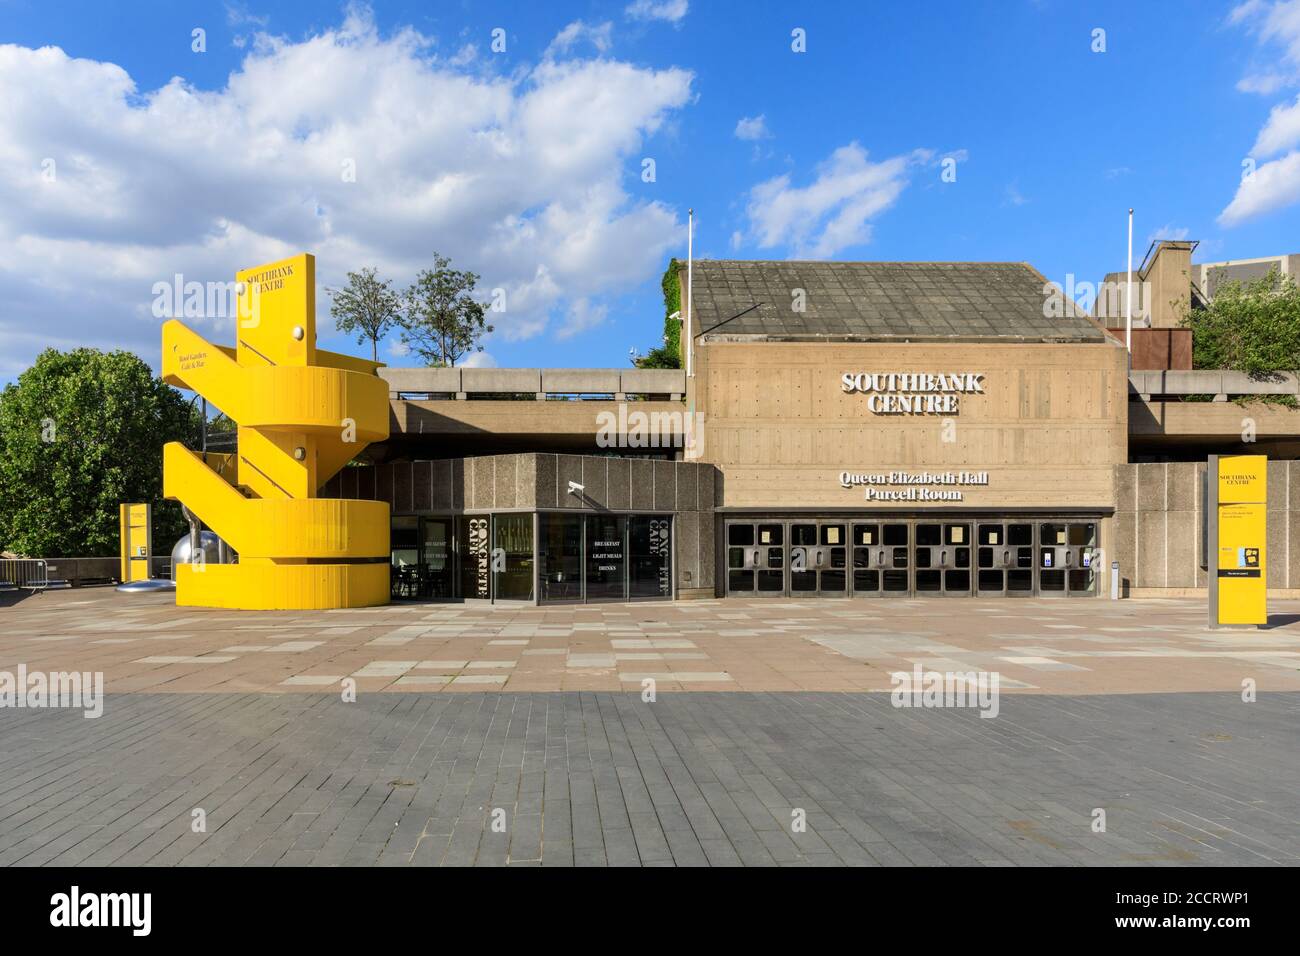 Southbank Centre, exterior of Queen Elizabeth Hall, iconic brutalist architecture culture and concert venue, London, England, UK Stock Photo